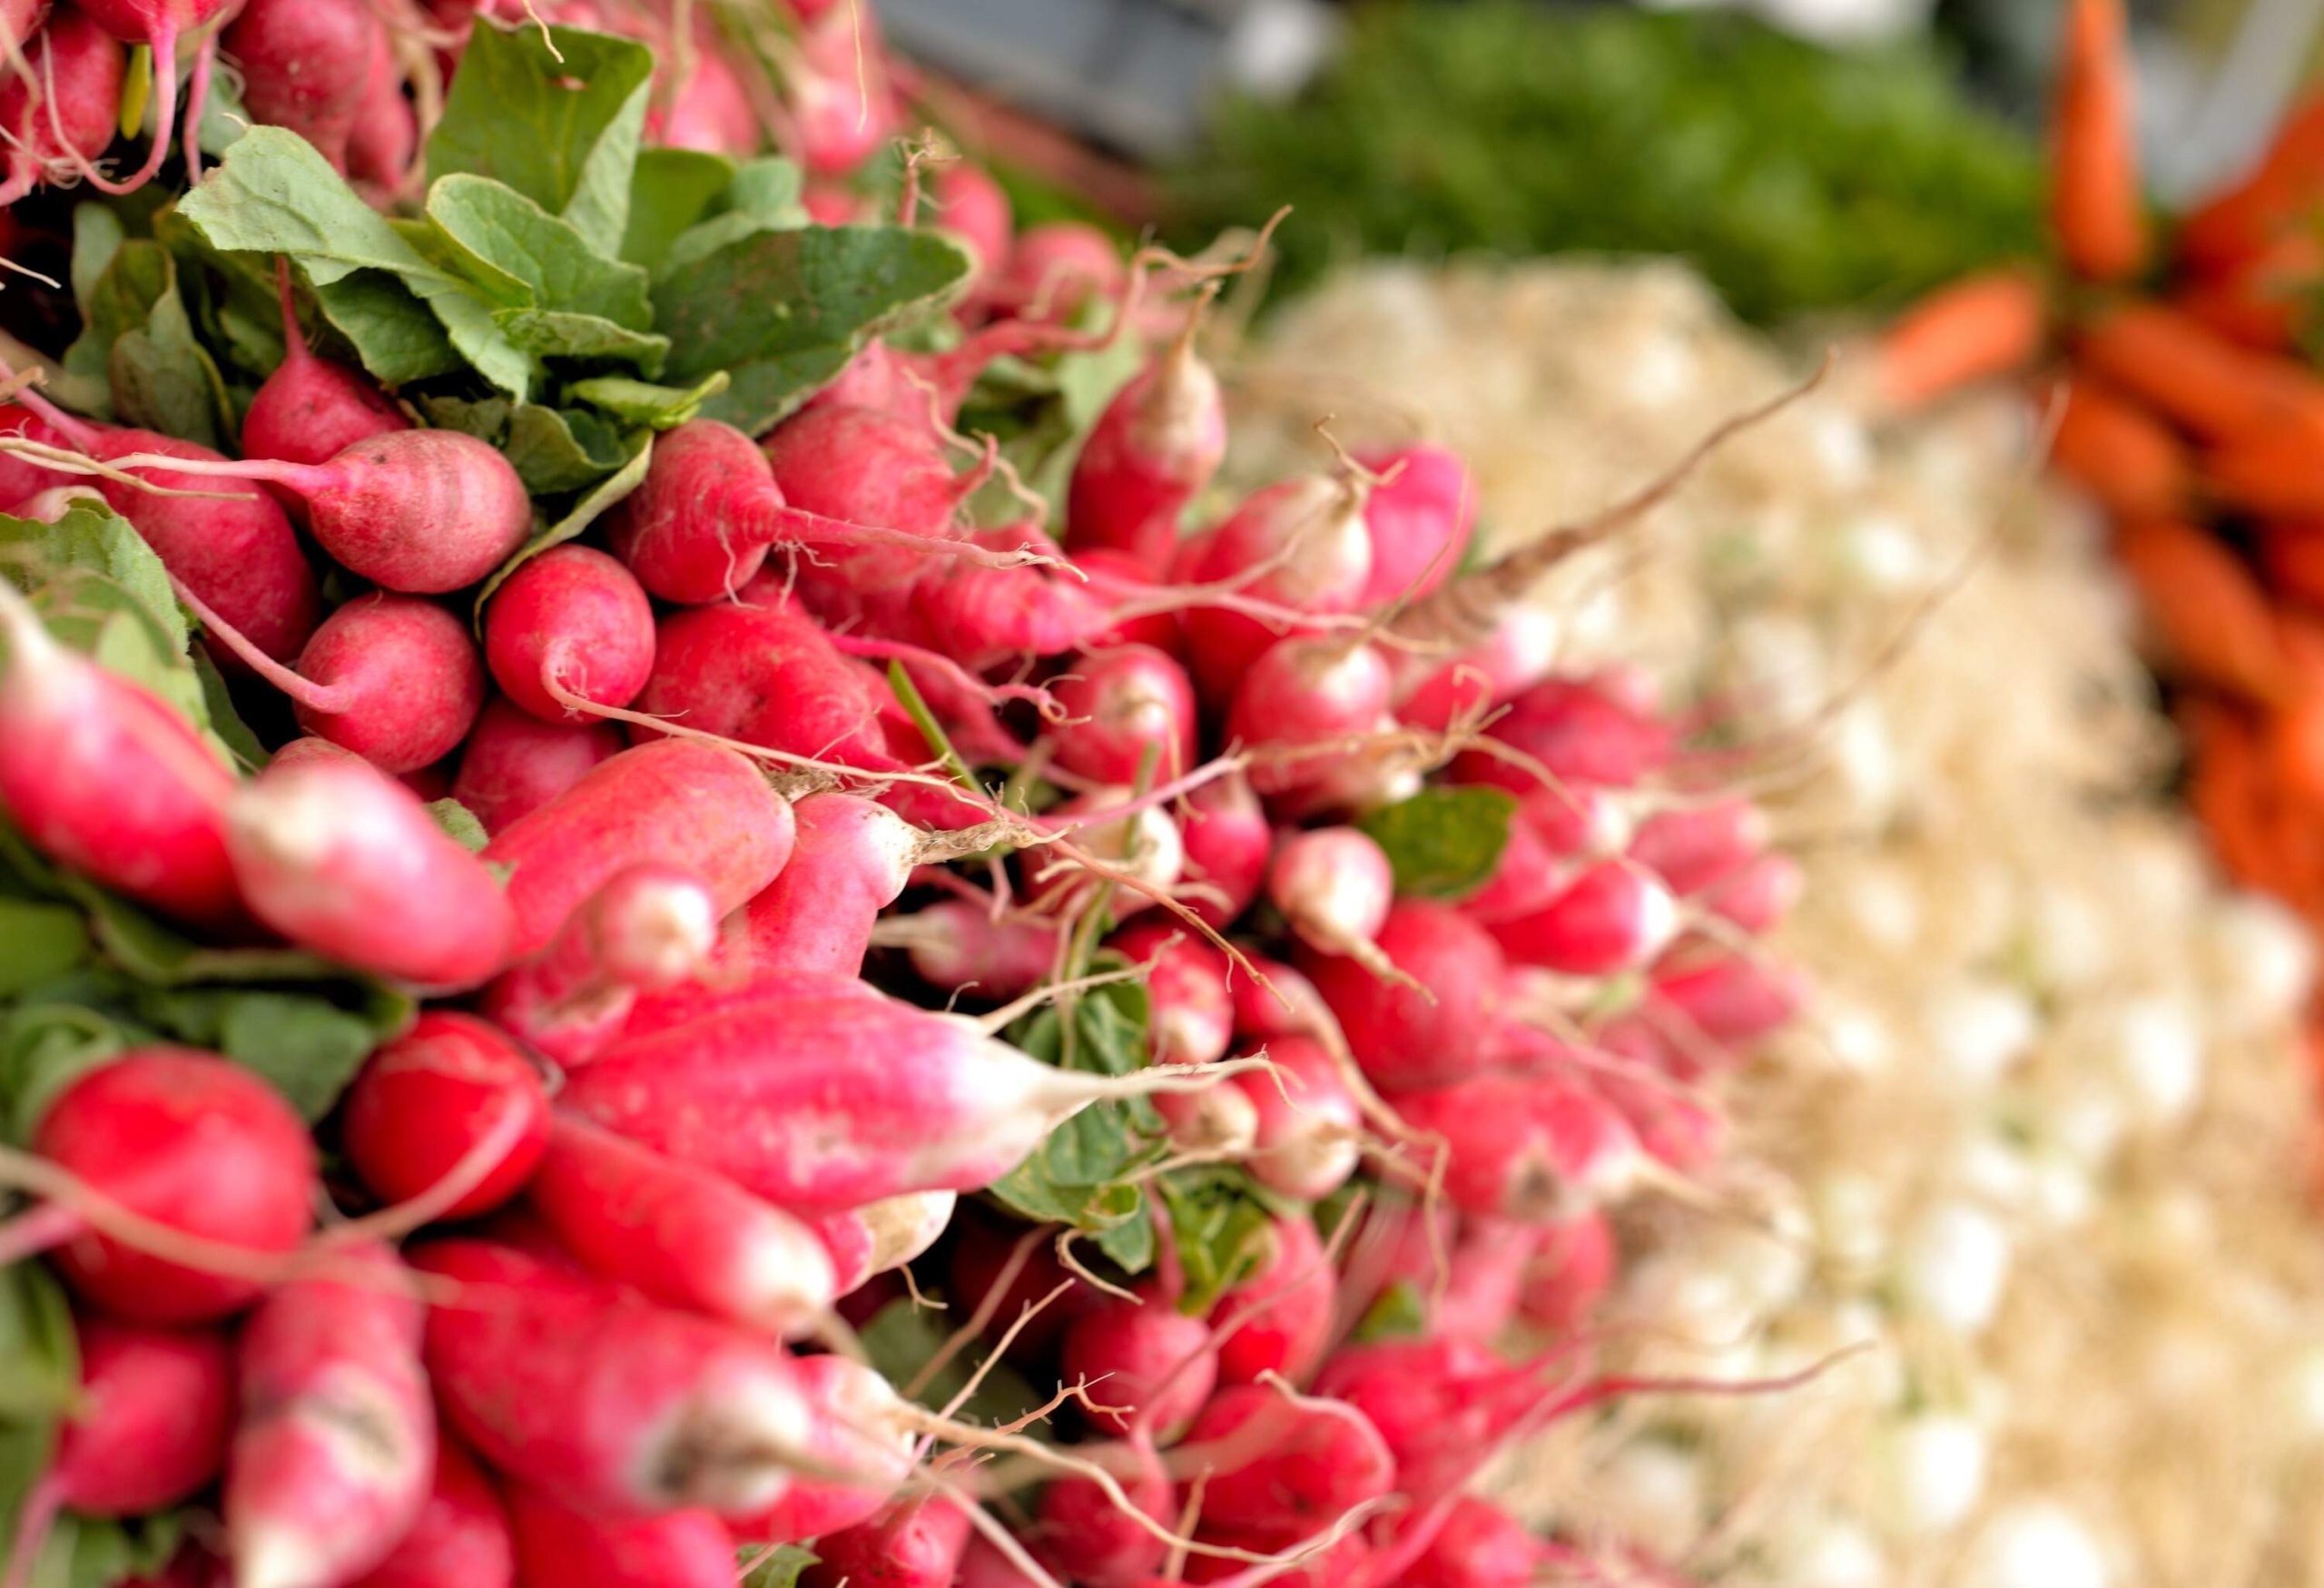 A bunch of pink radishes is displayed for sale in the market.